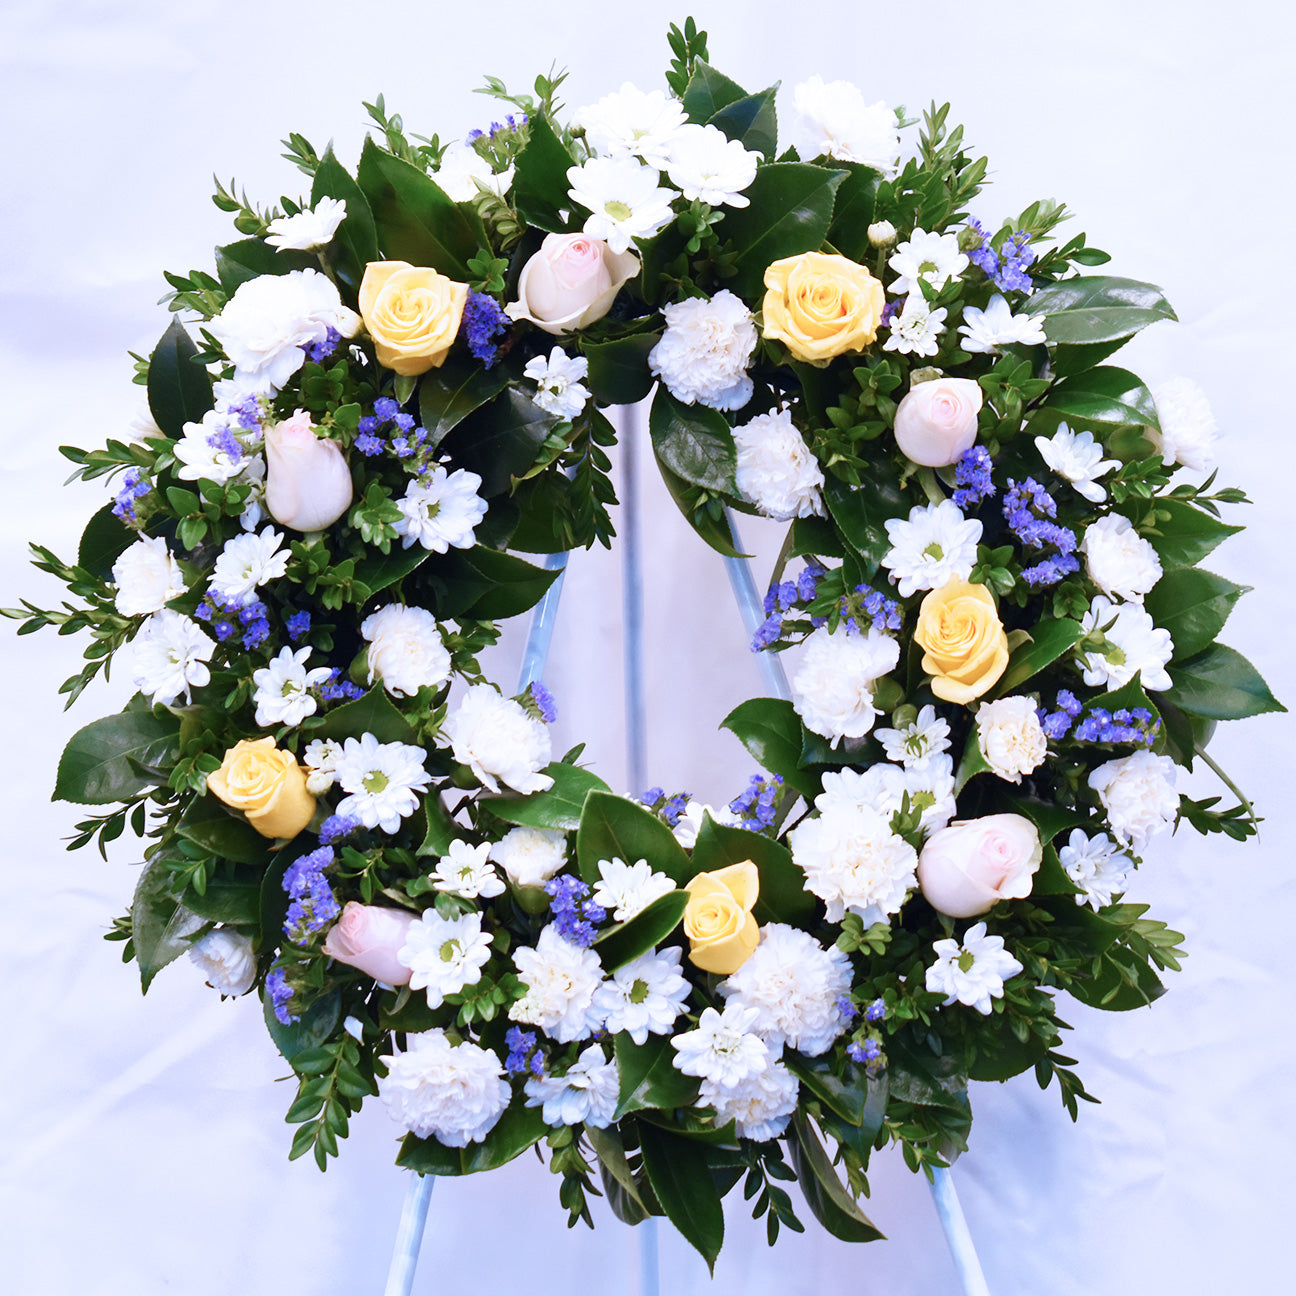 Blueberry and Apricot Pie Funeral Flower Wreath